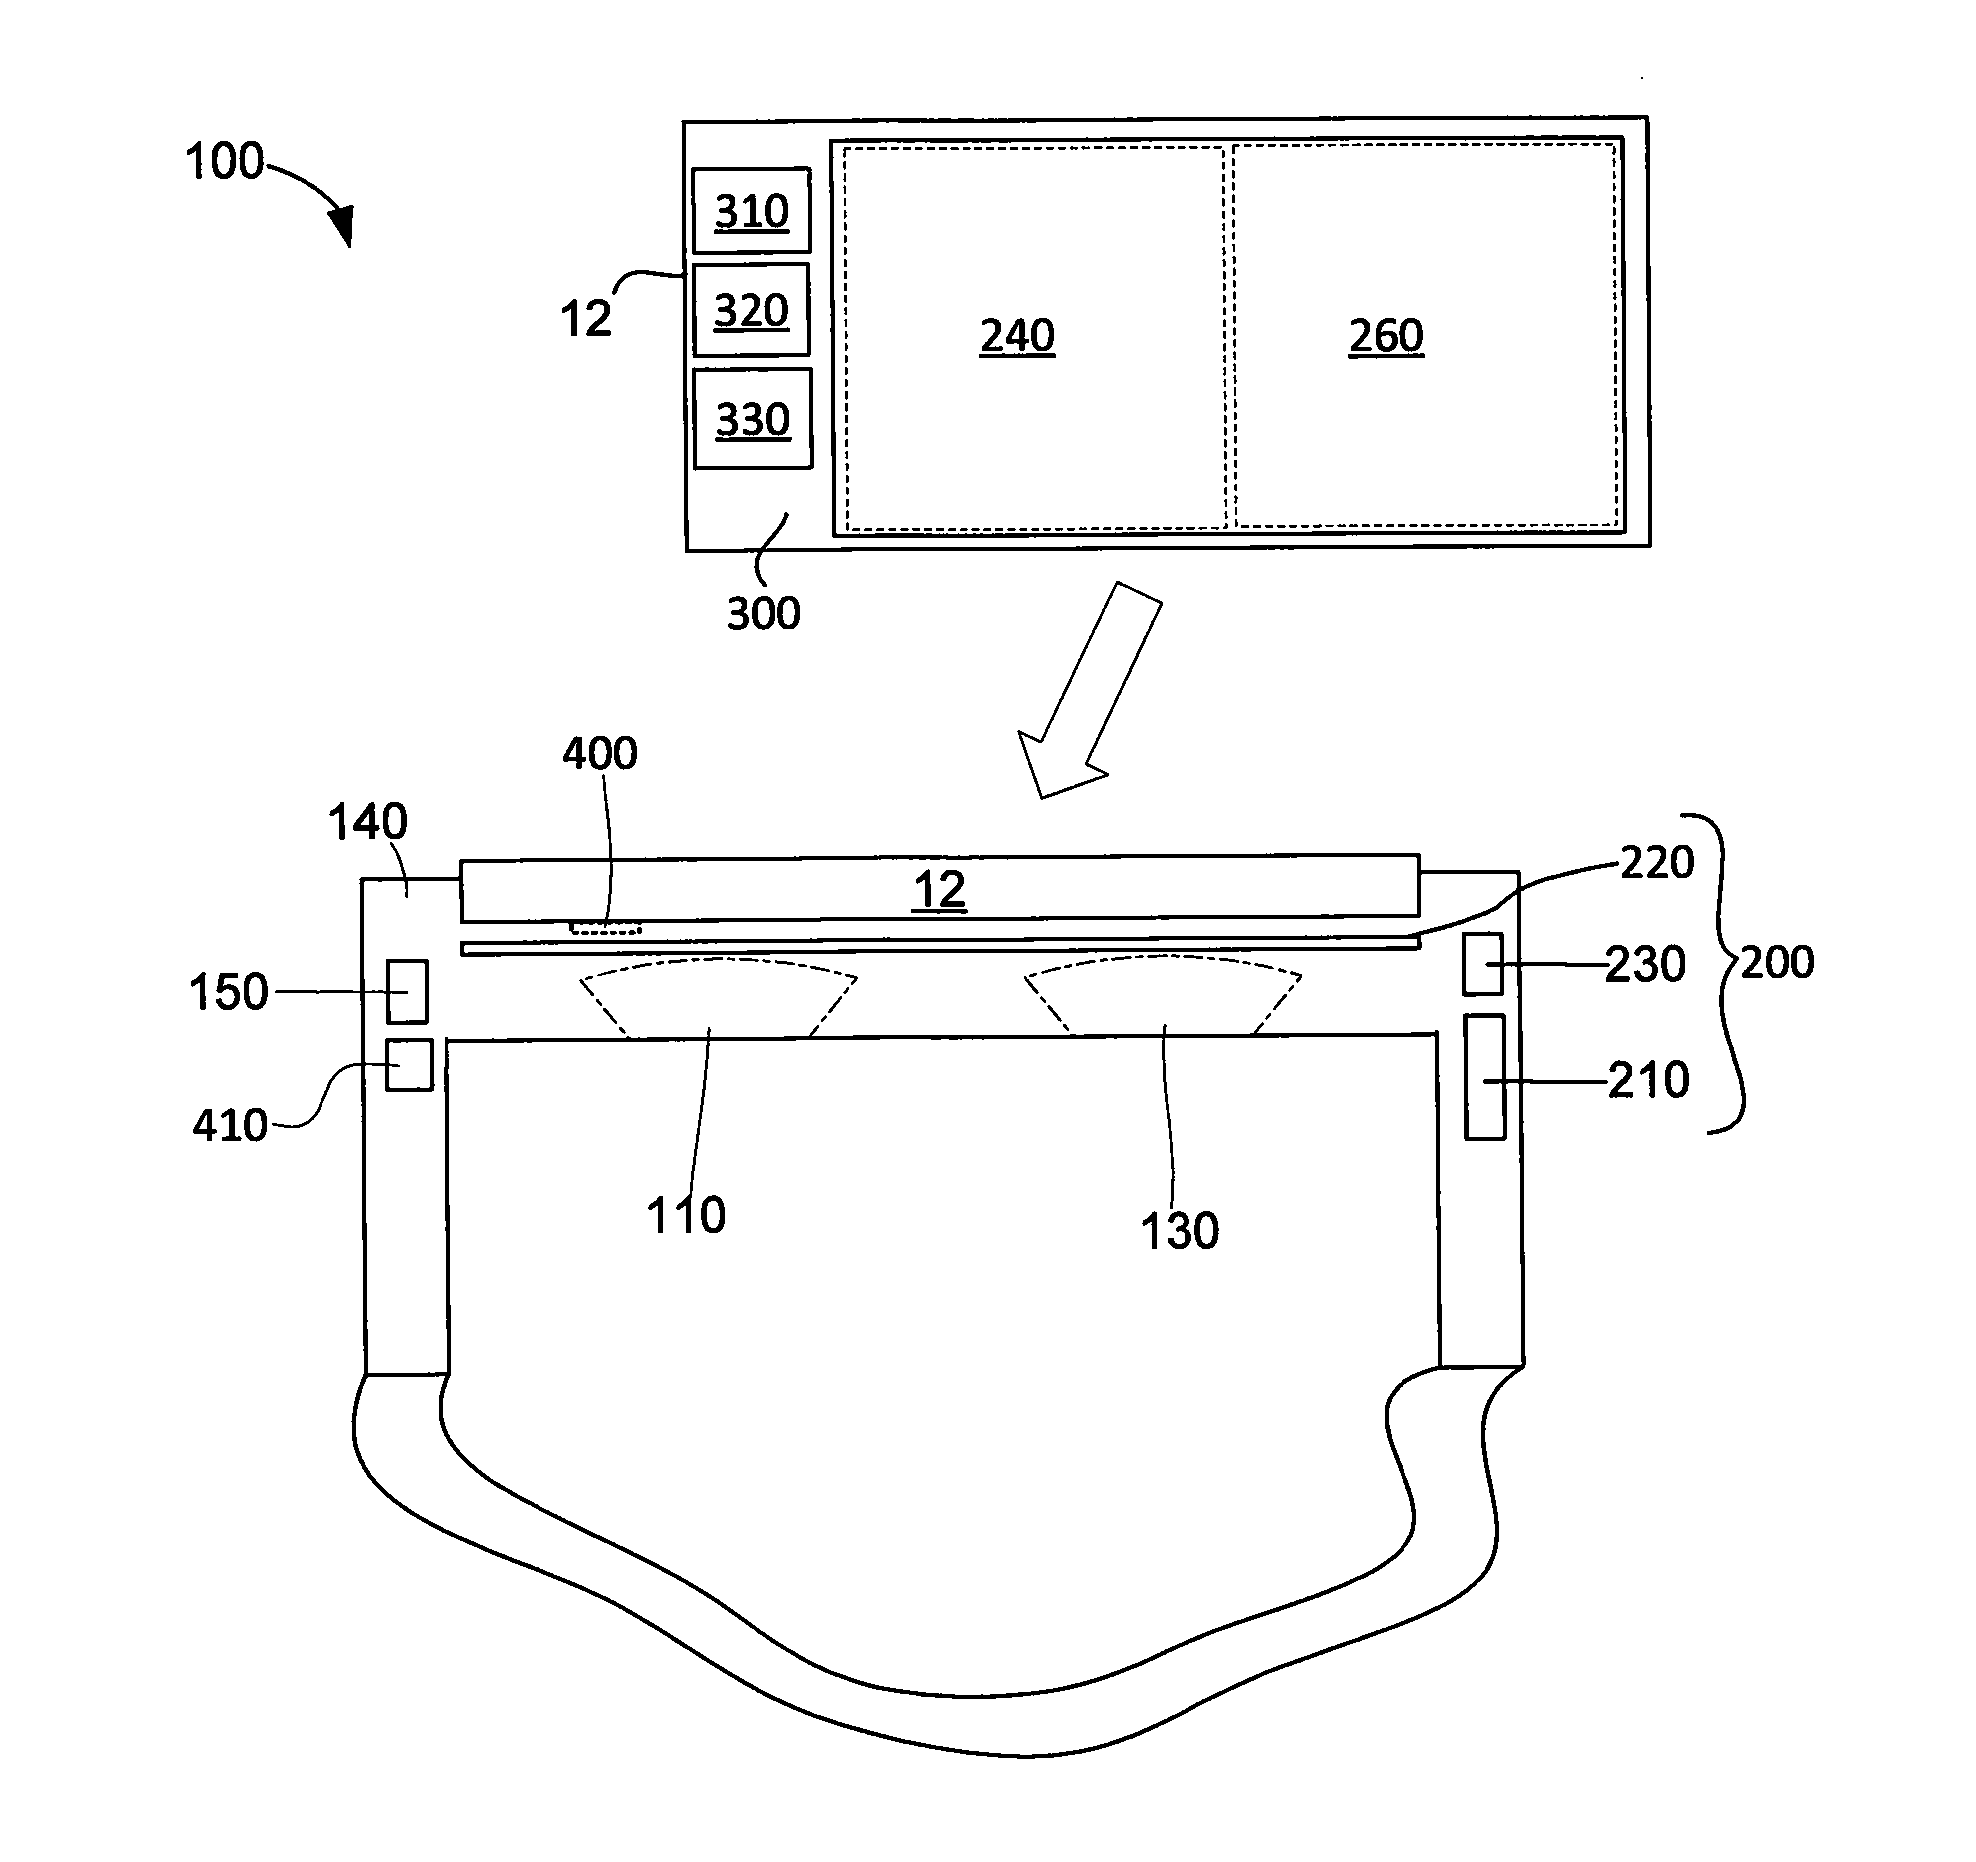 Method and system for reducing motion blur when experiencing virtual or augmented reality environments